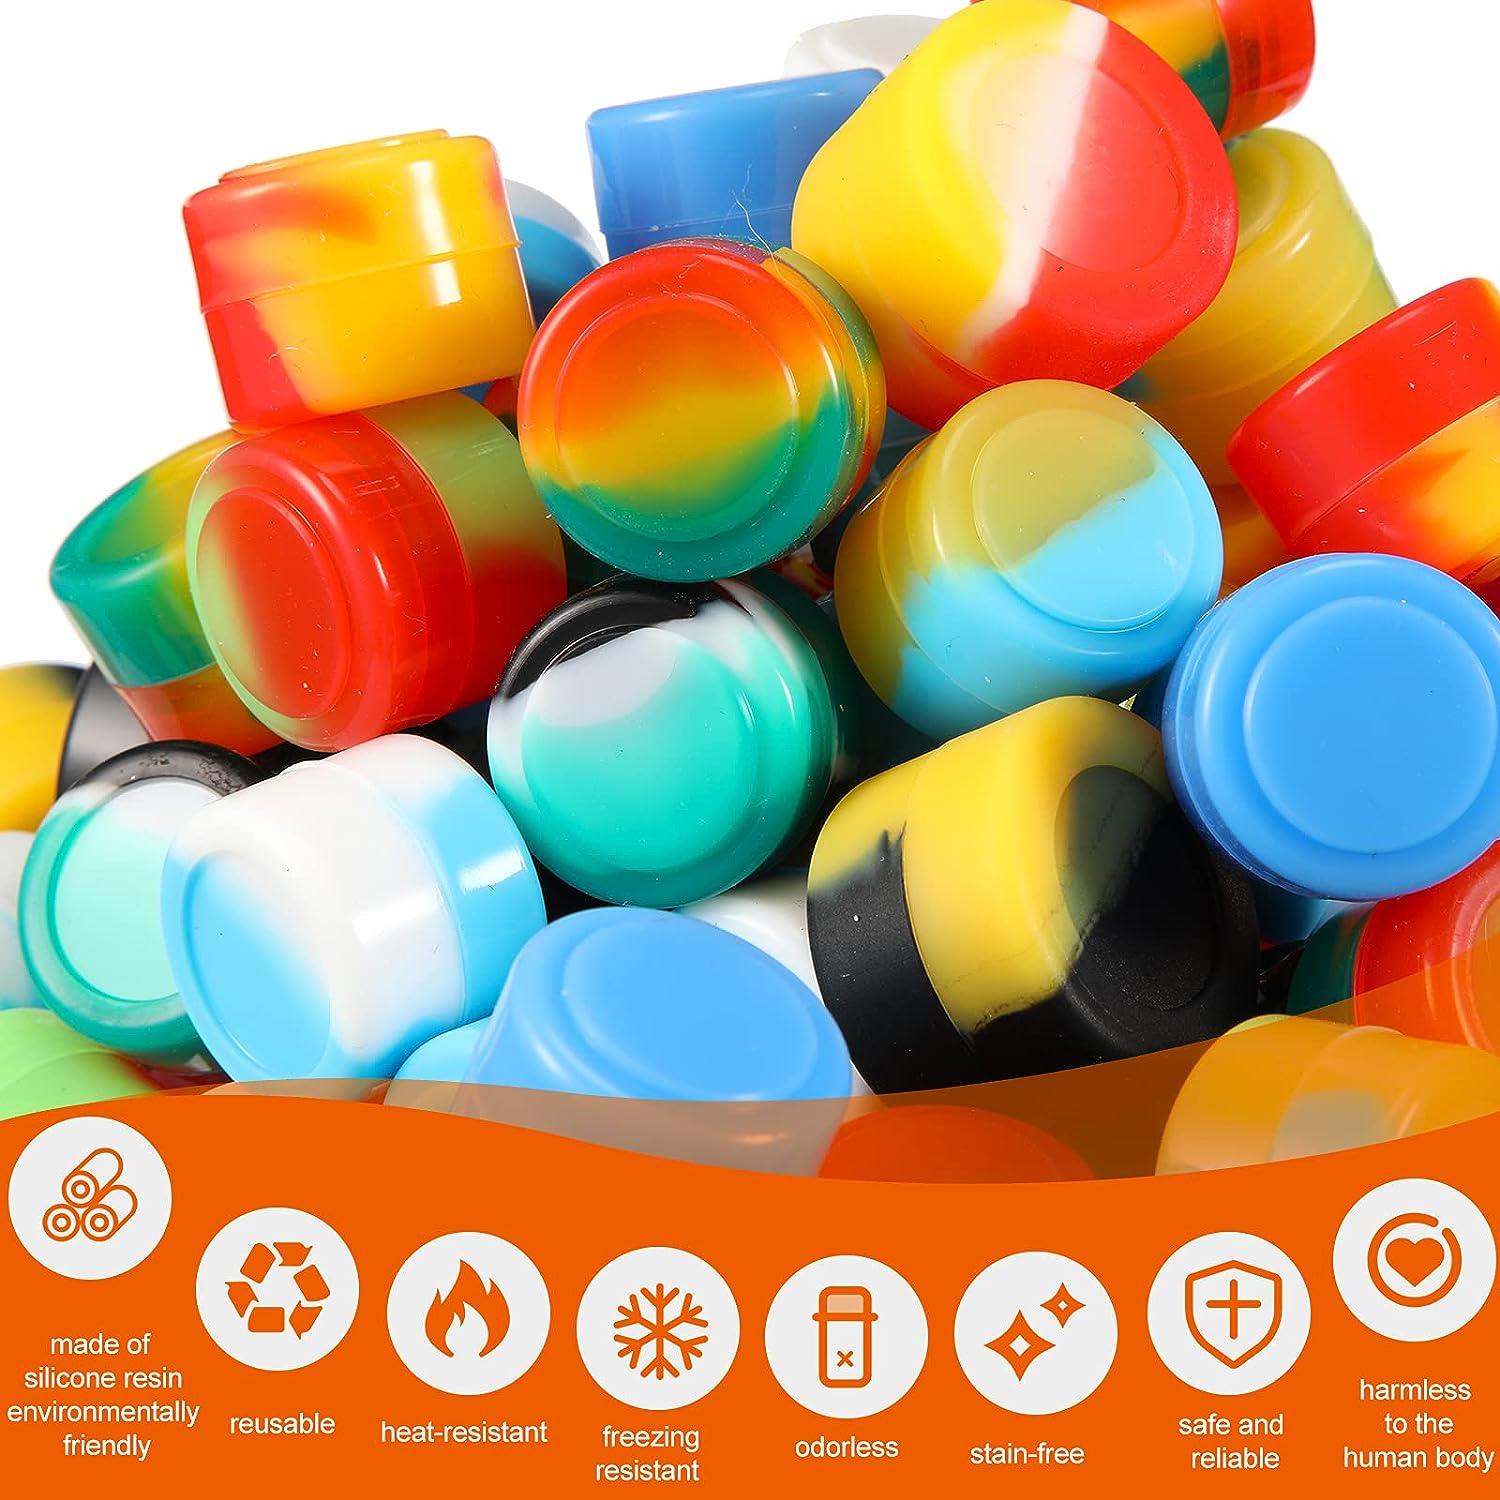  KISEER 30 Pcs 5ml Silicone Wax Containers Assorted Colors  Multi Use Non Stick Wax Oil Storage Jars : Arts, Crafts & Sewing